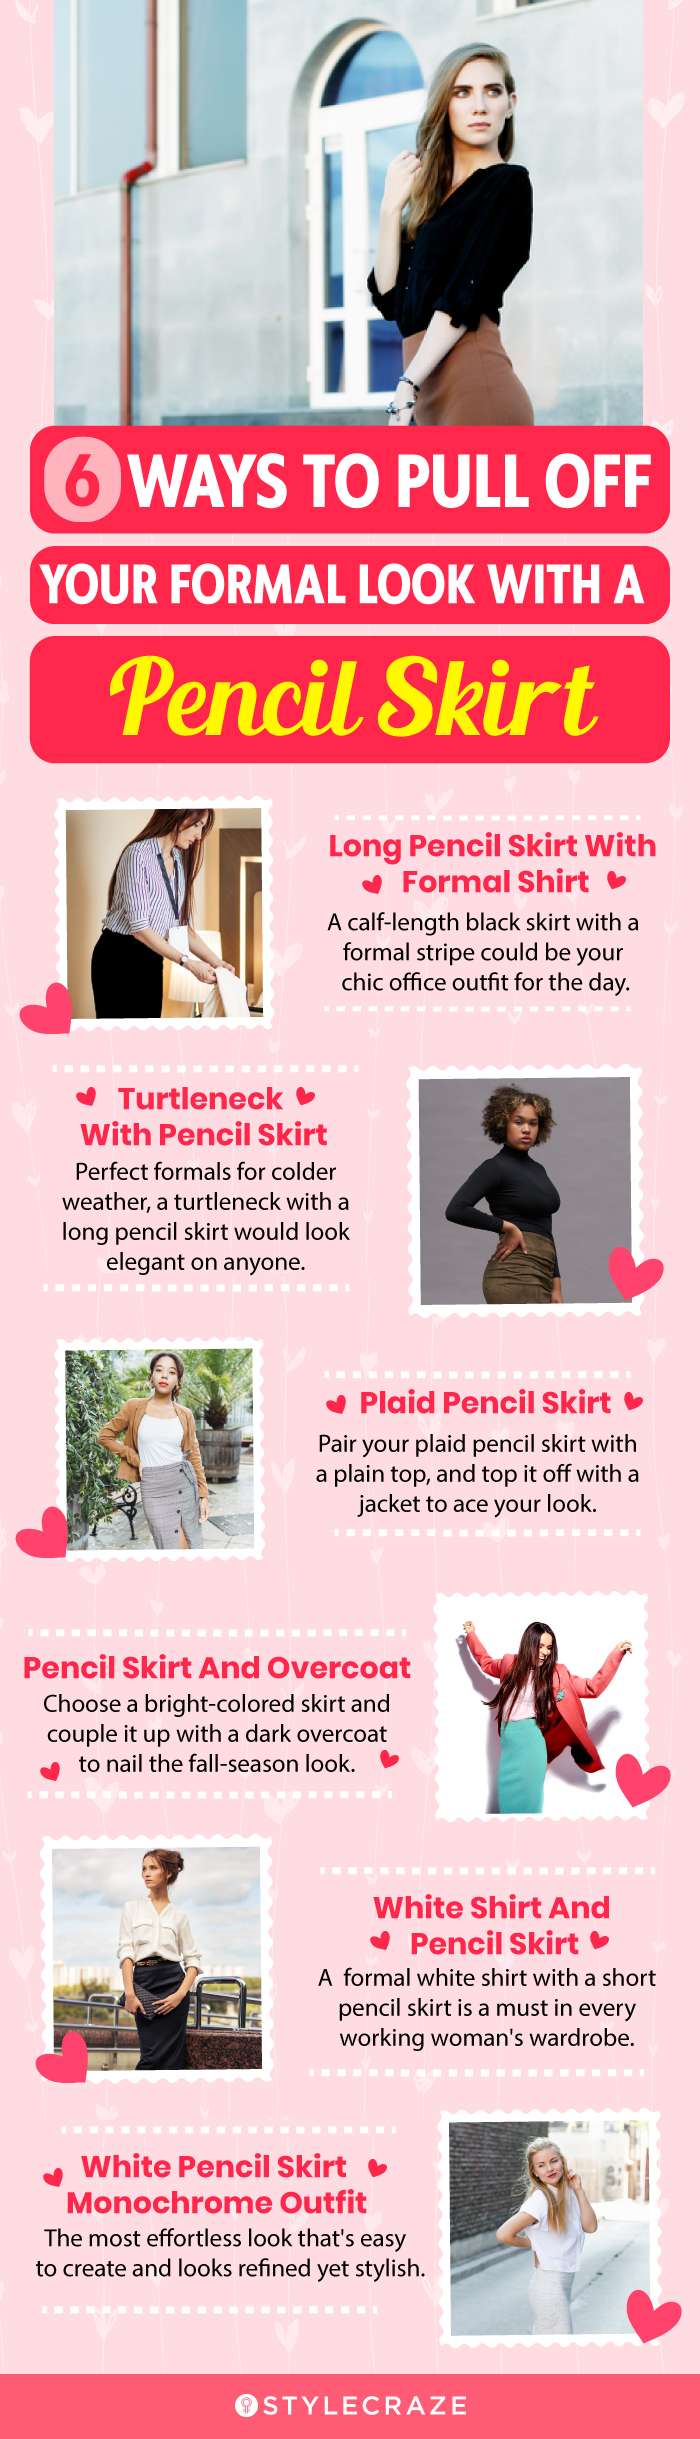 6 ways to pull off your formal look with a pencil skrit(infographic)